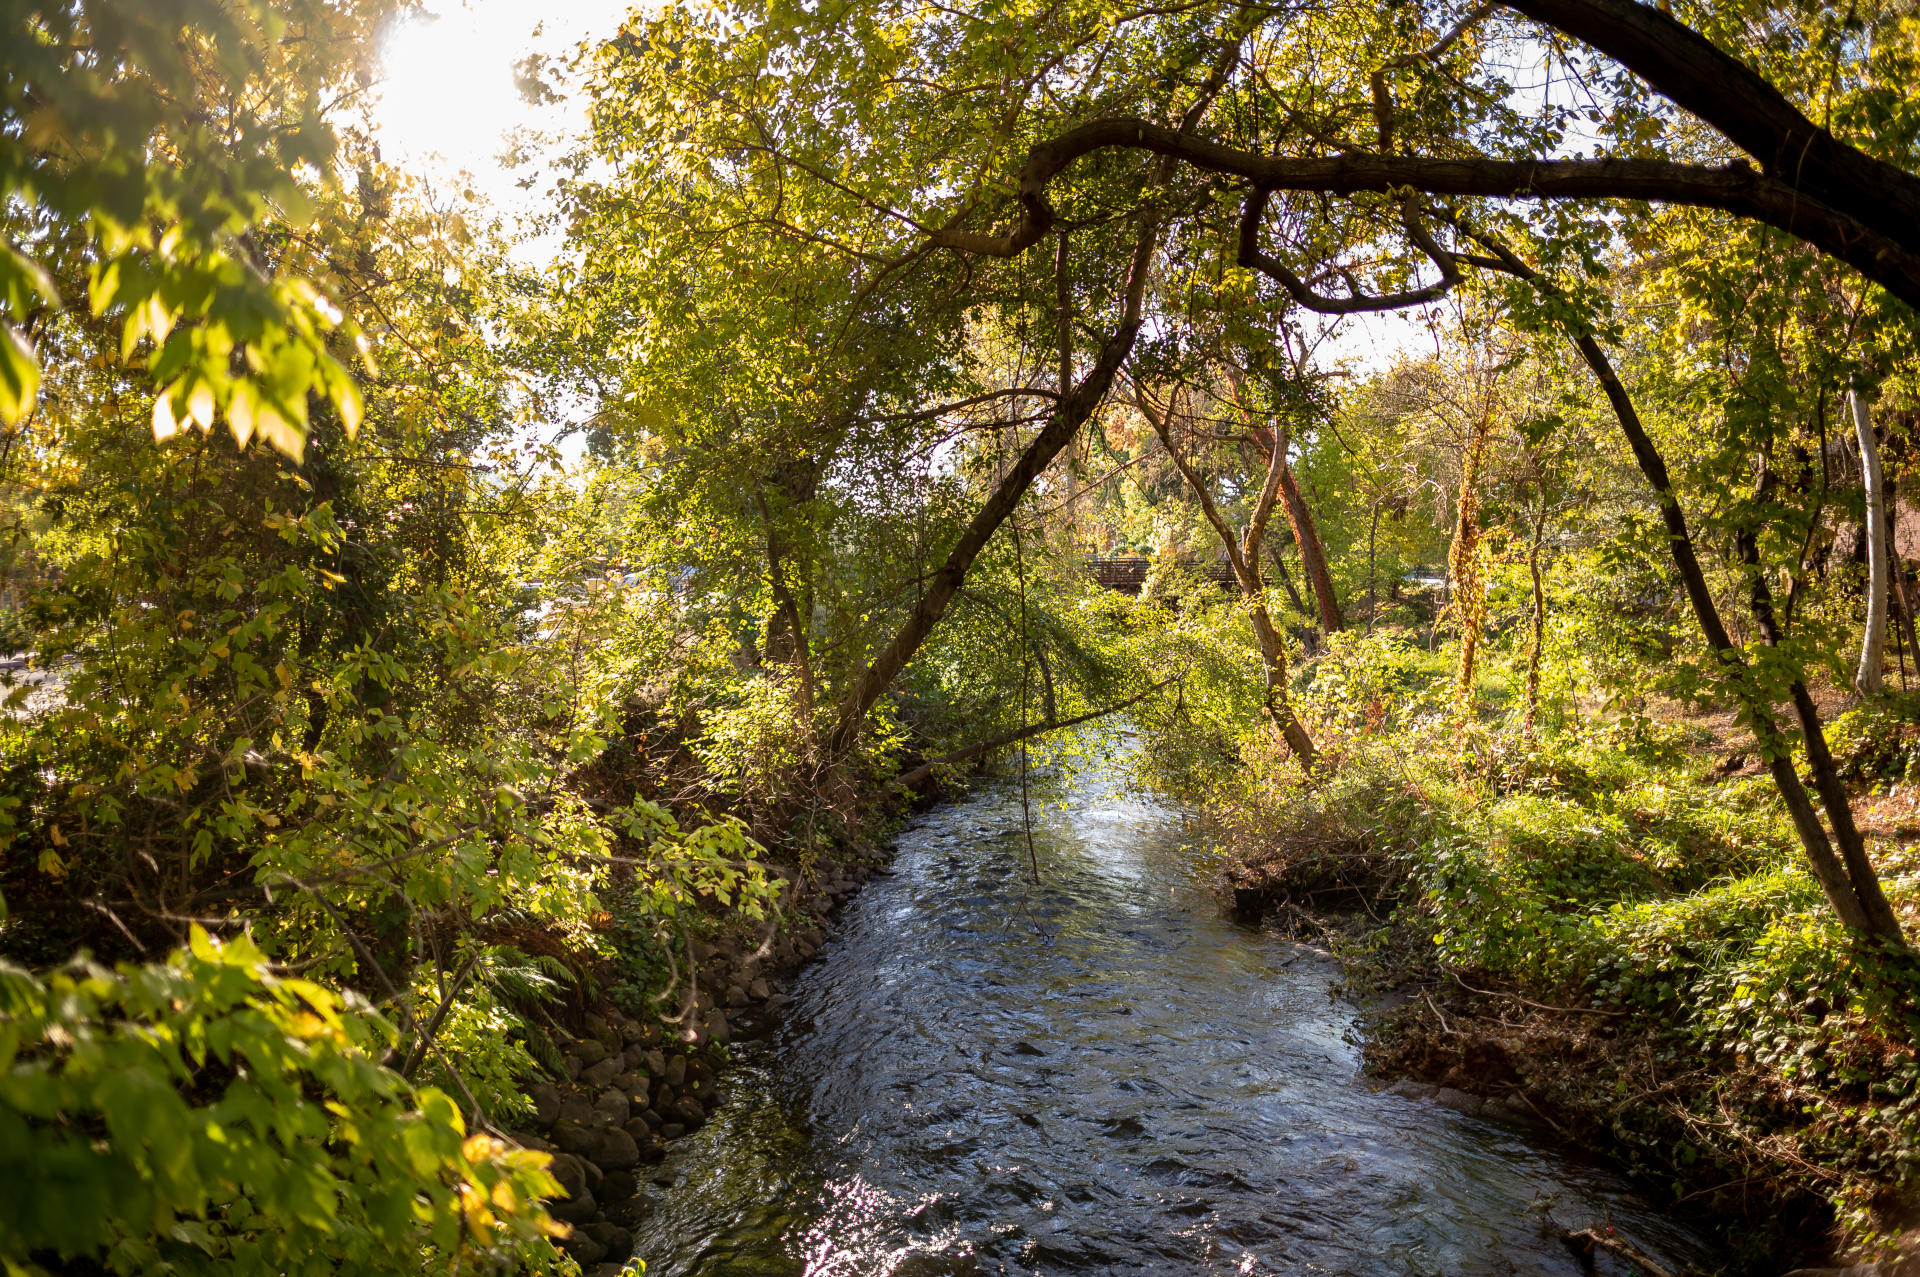 Creek waters flow on a college campus with a tree canopy hanging overhead.